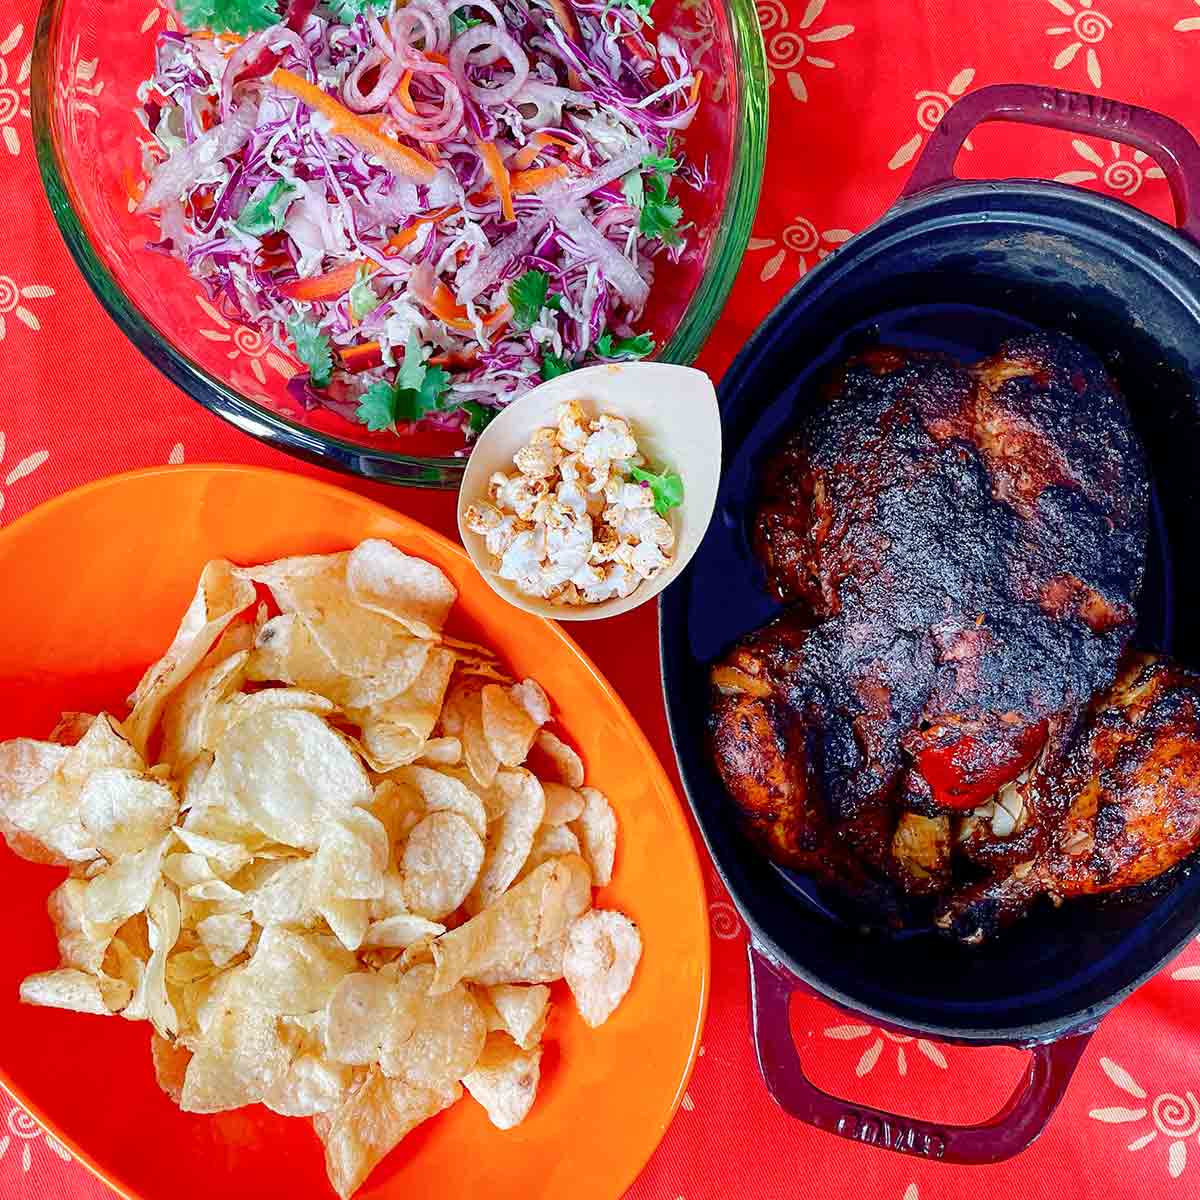 A red tablecloth with an enamel roaster containing a crisp, roasted chicken, an orange bowl of potato chips, a green glass bowl of coleslaw, and a small bowl of popcorn.